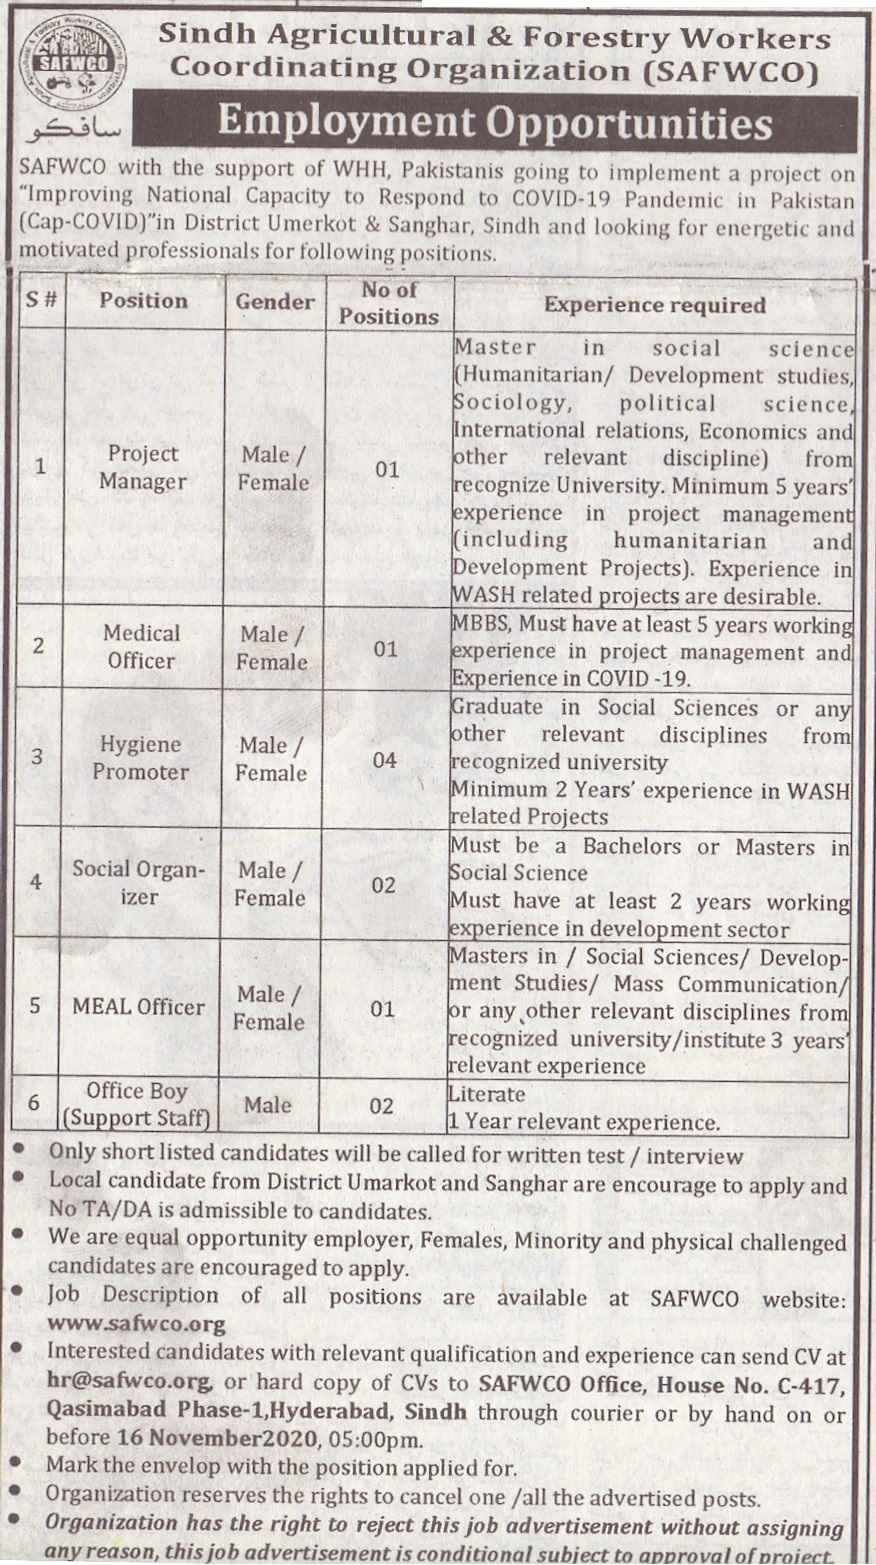 Latest Sindh Agricultural and Forestry Workers Coordinating Organization NGO Posts Jobs 2020